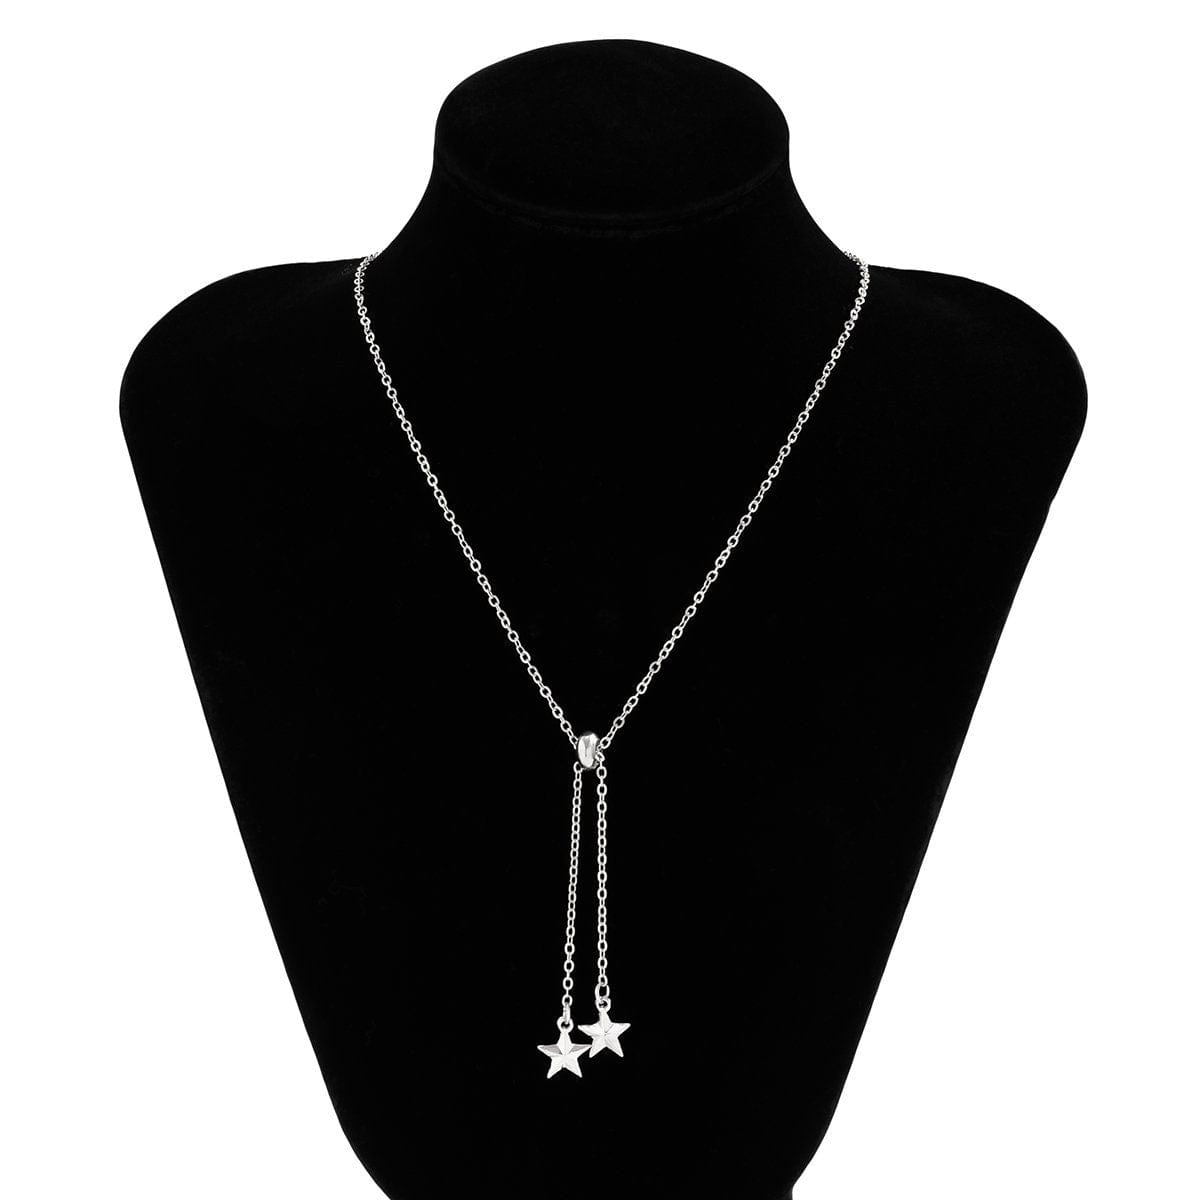 Chic Gold Silver Tone Star Charm Cable Chain Y Necklace - ArtGalleryZen